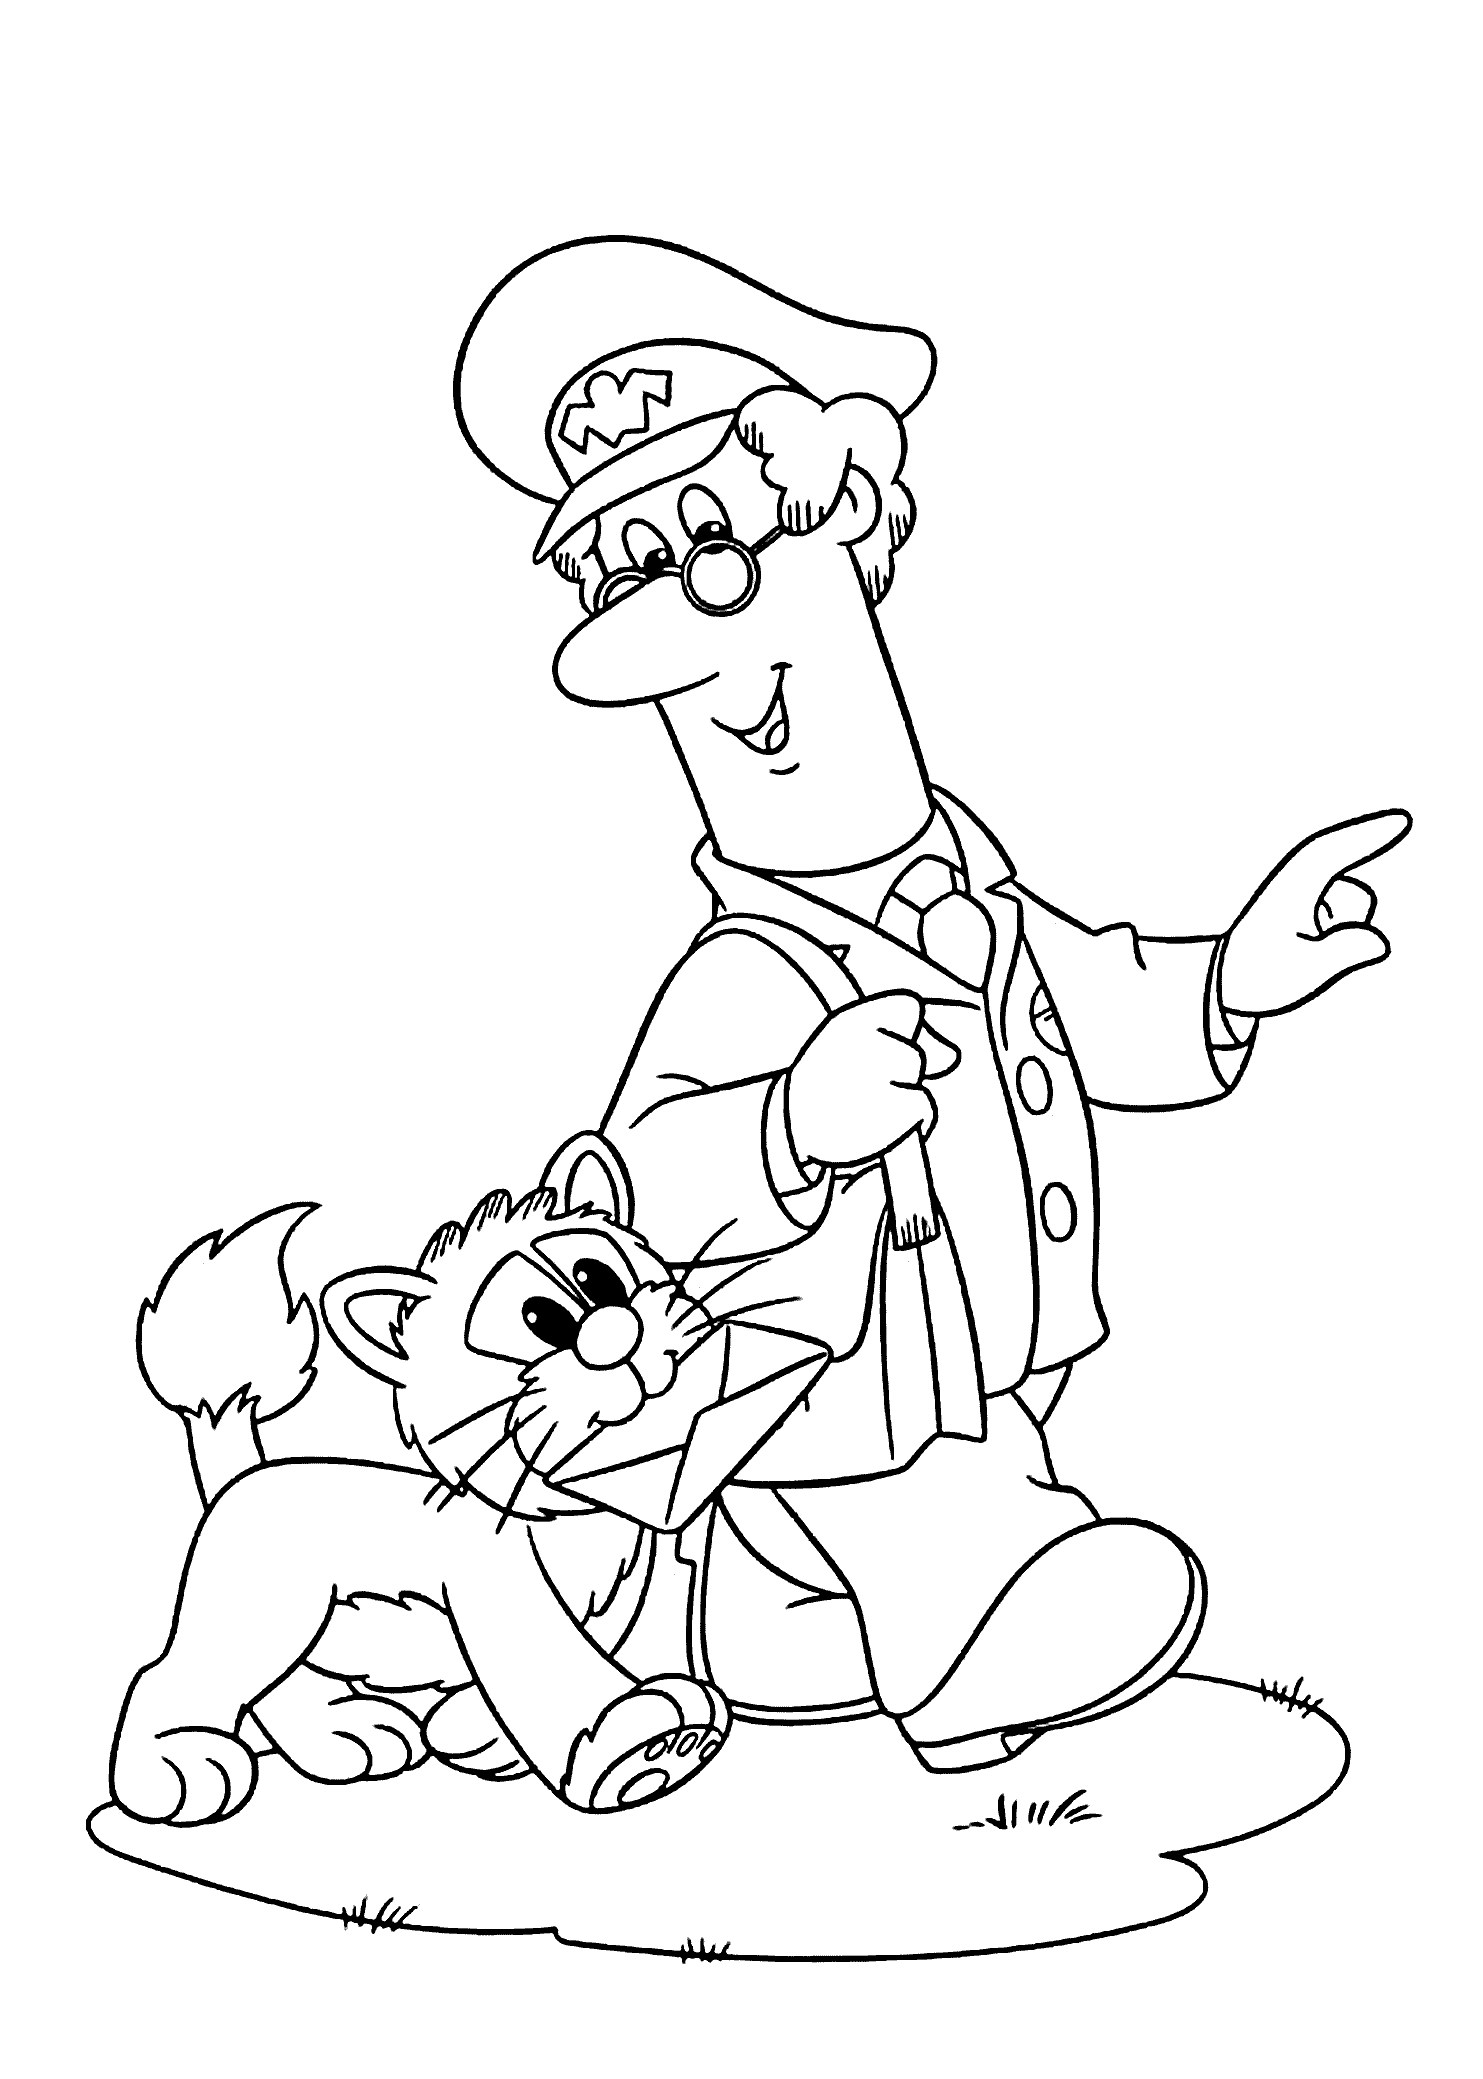 Postman Pat The Delivery Coloring Pages For Kids Printable Free Postman Pat Cartoon C